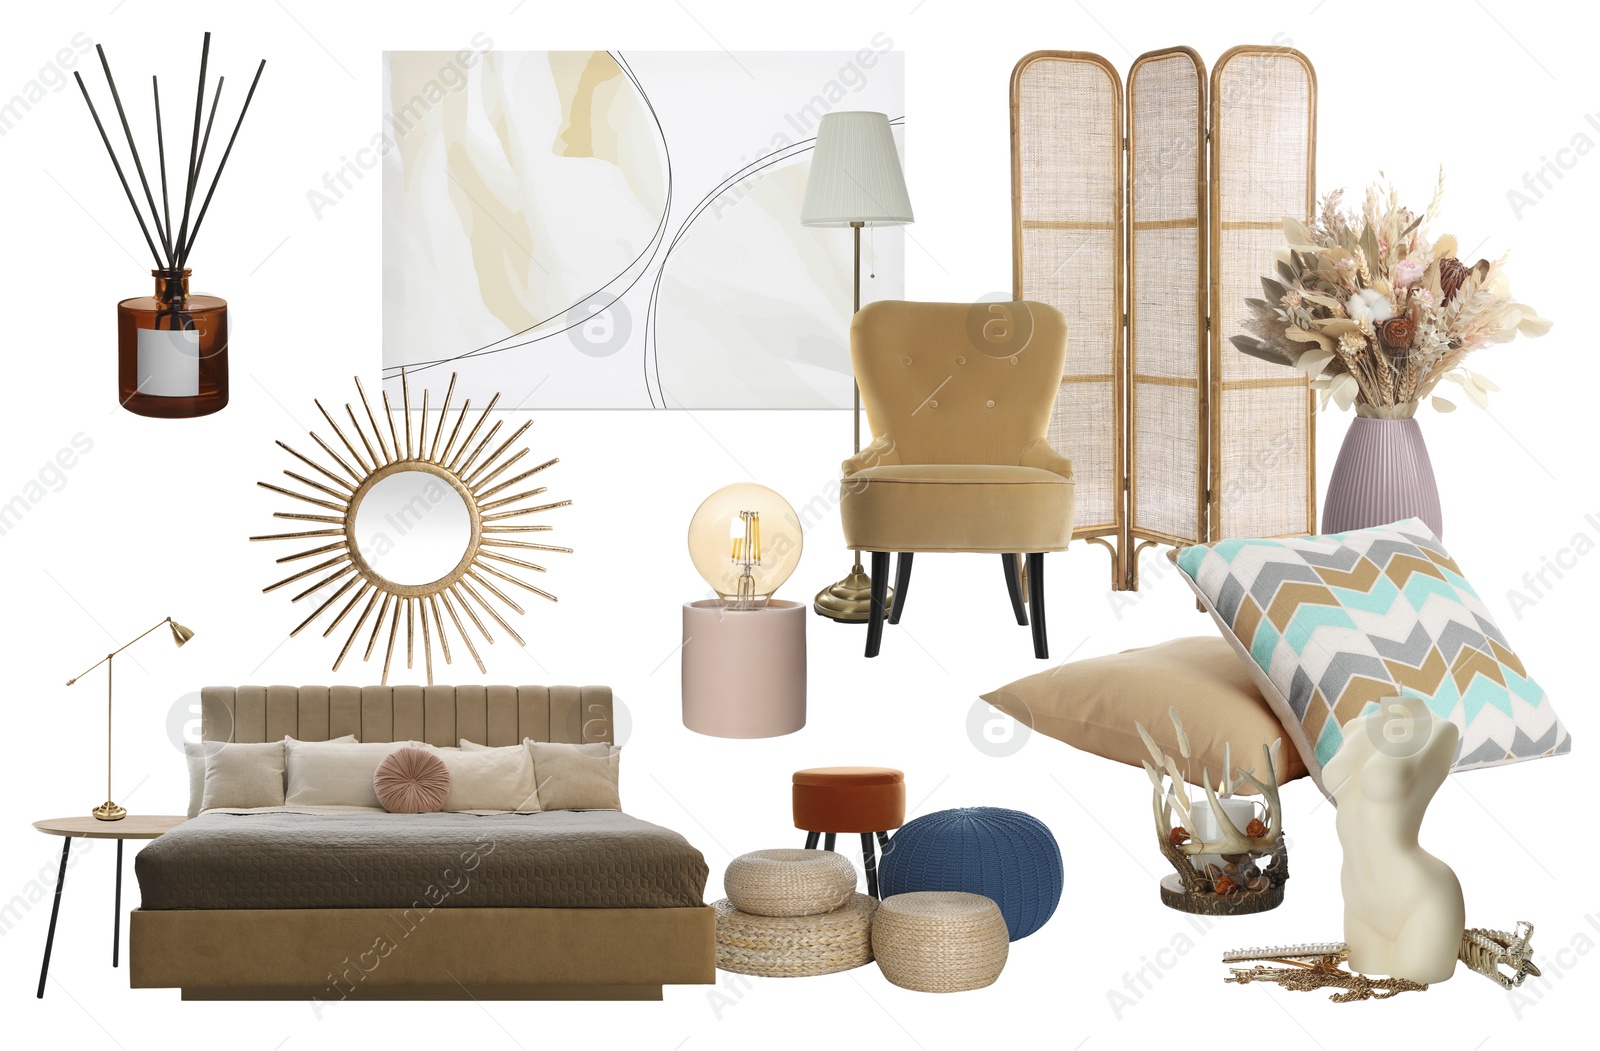 Image of Bedroom interior design. Collage with different combinable furniture and decorative elements on white background